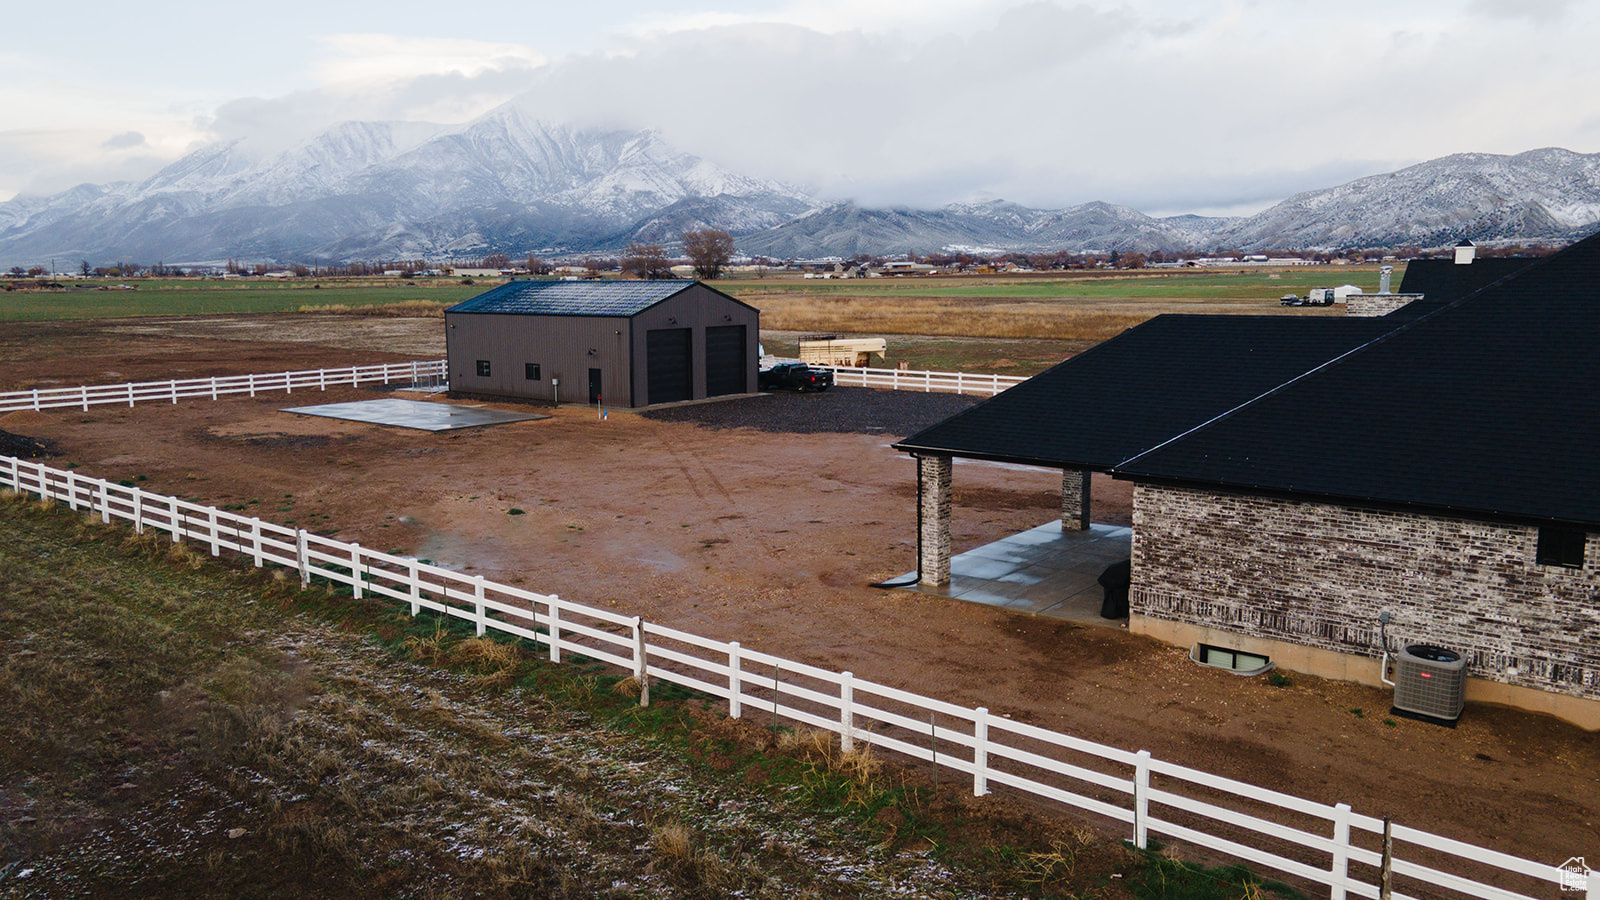 View of stable with a mountain view, a rural view, and a storage shed